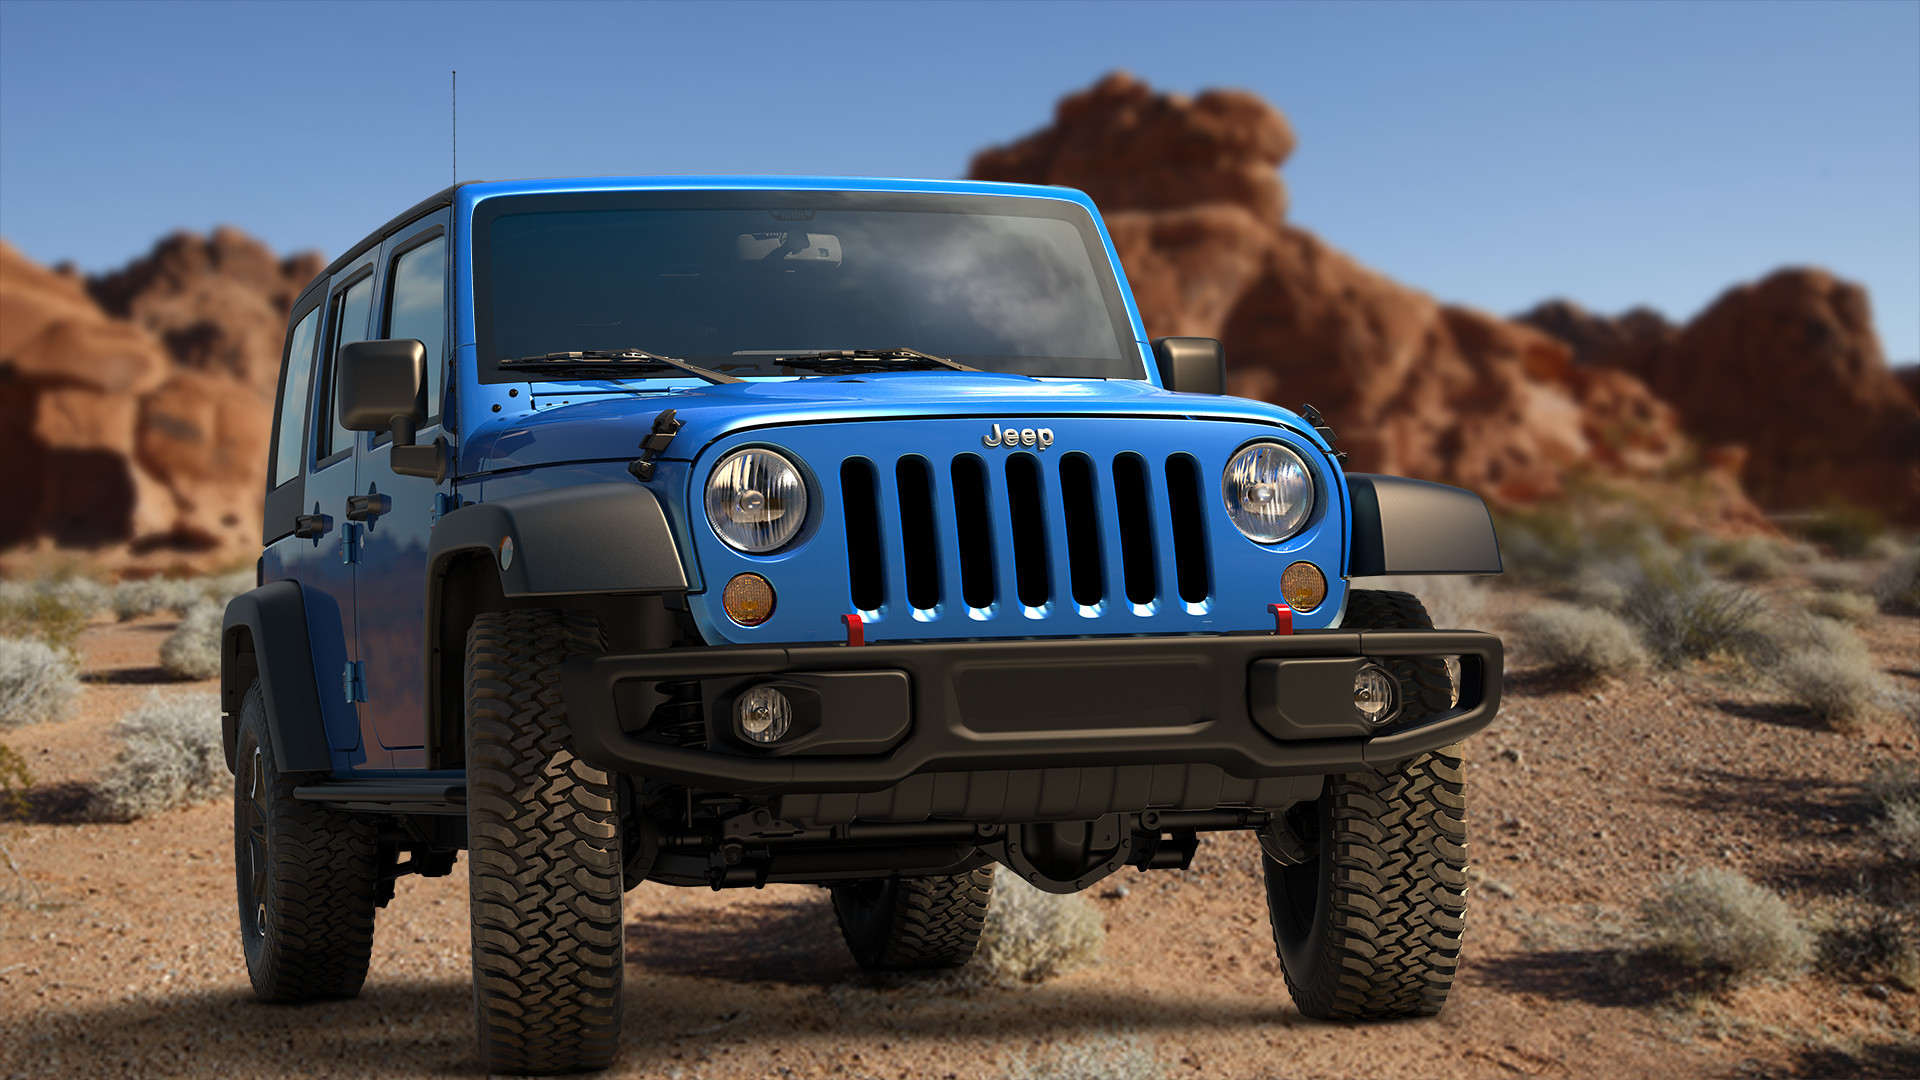 All Jeep Wrangler wallpapers.